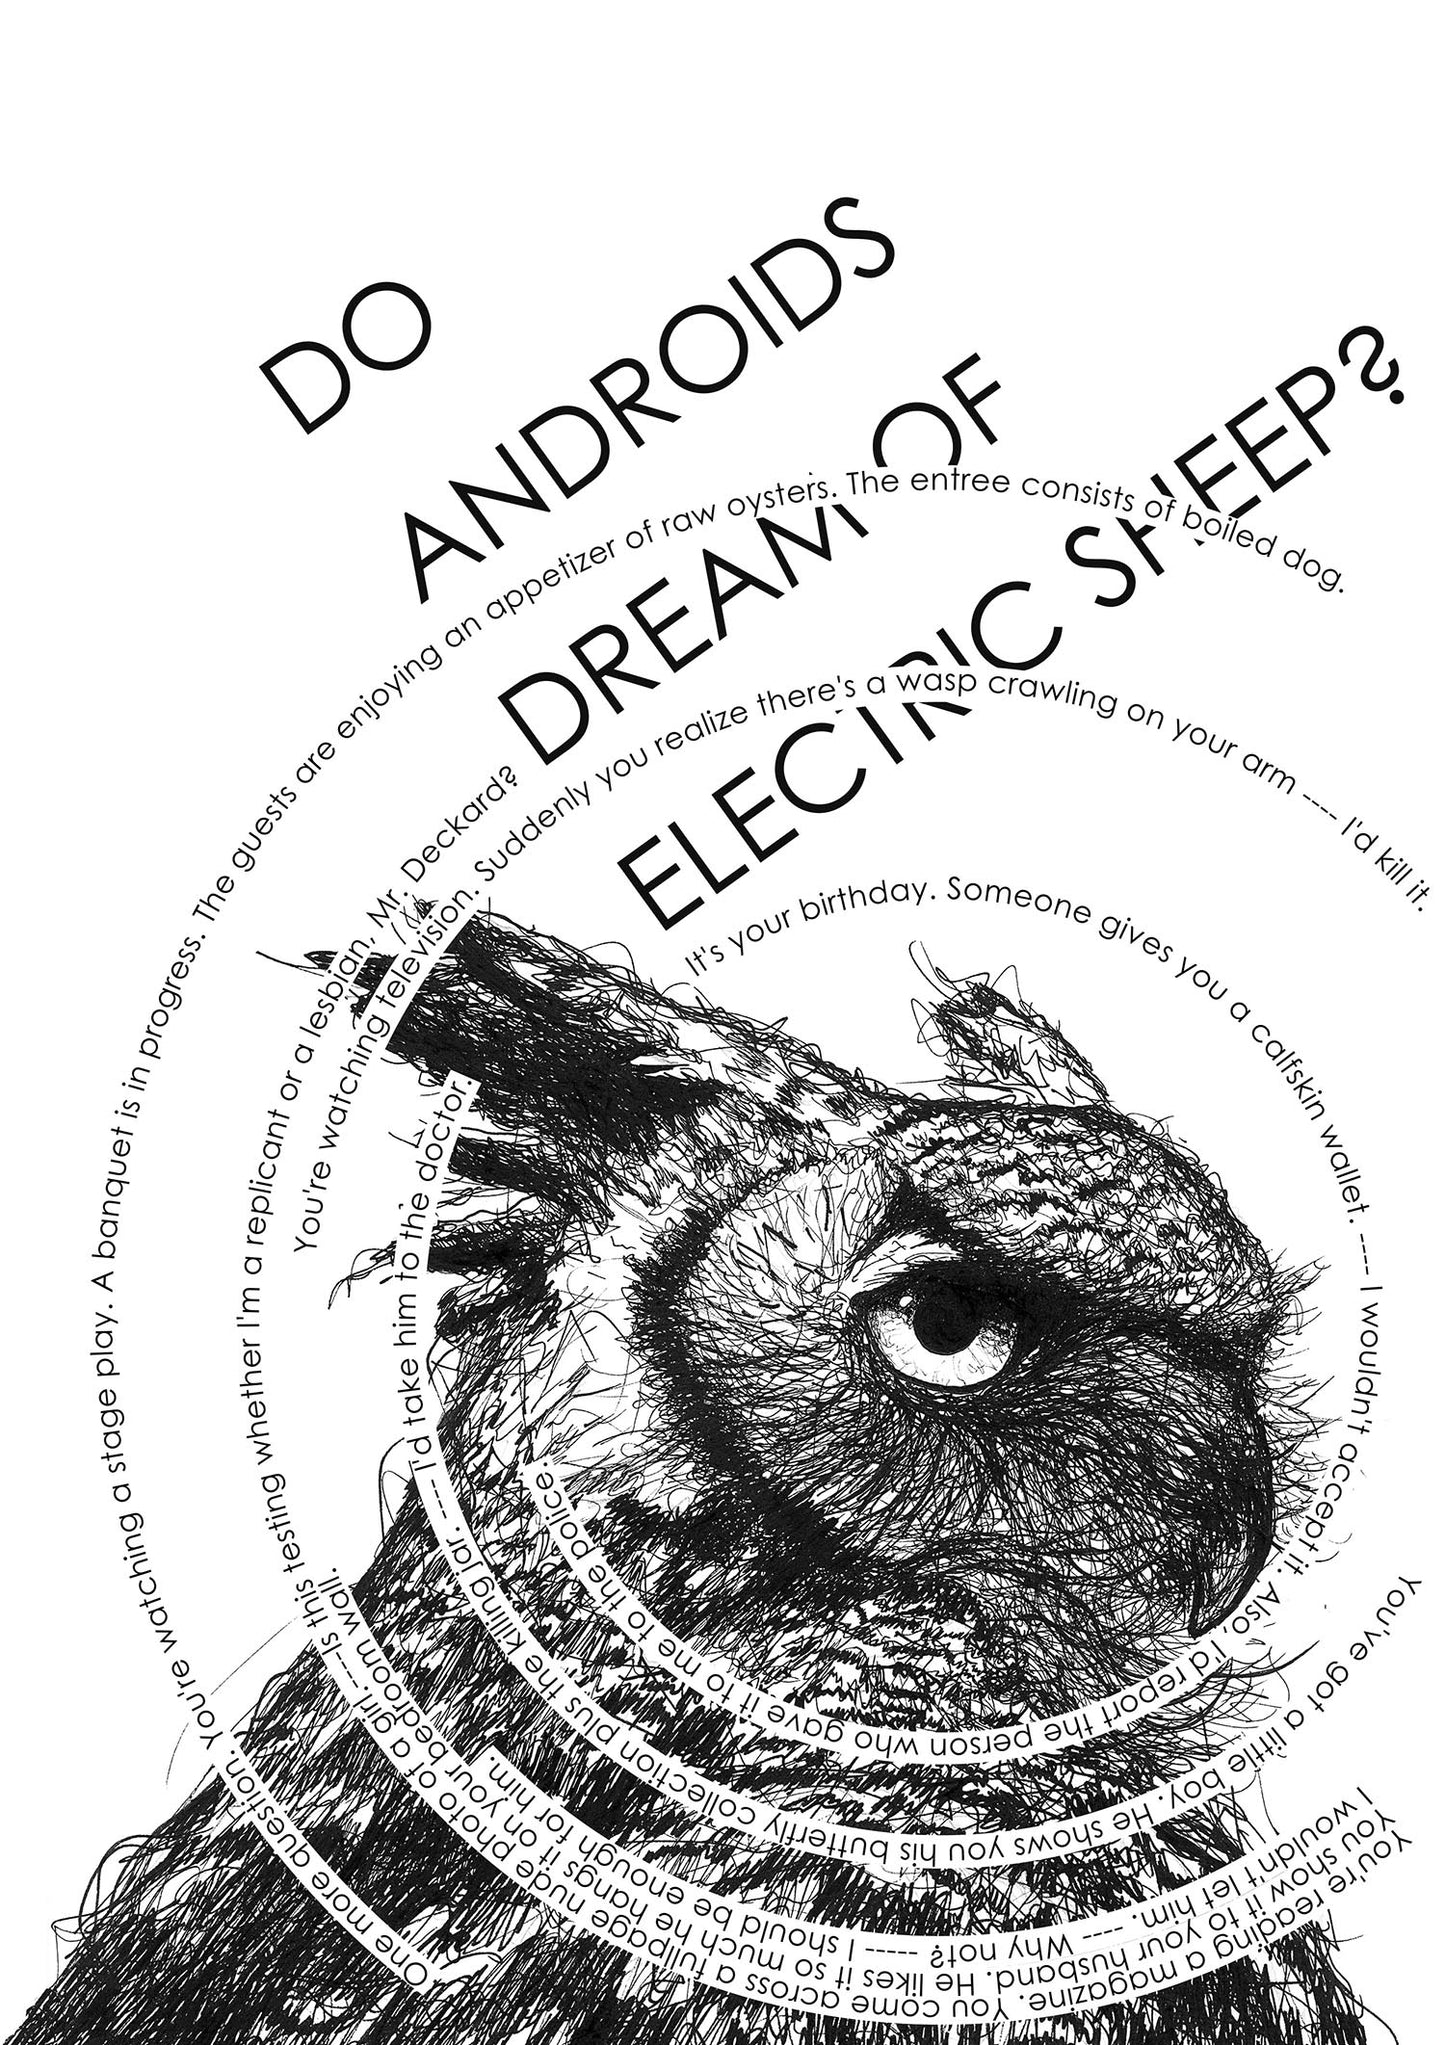 Blade Runner Poster The Owl V2, Do Androids Dream Of Electric Sheep?, Philip K. Dick Poster